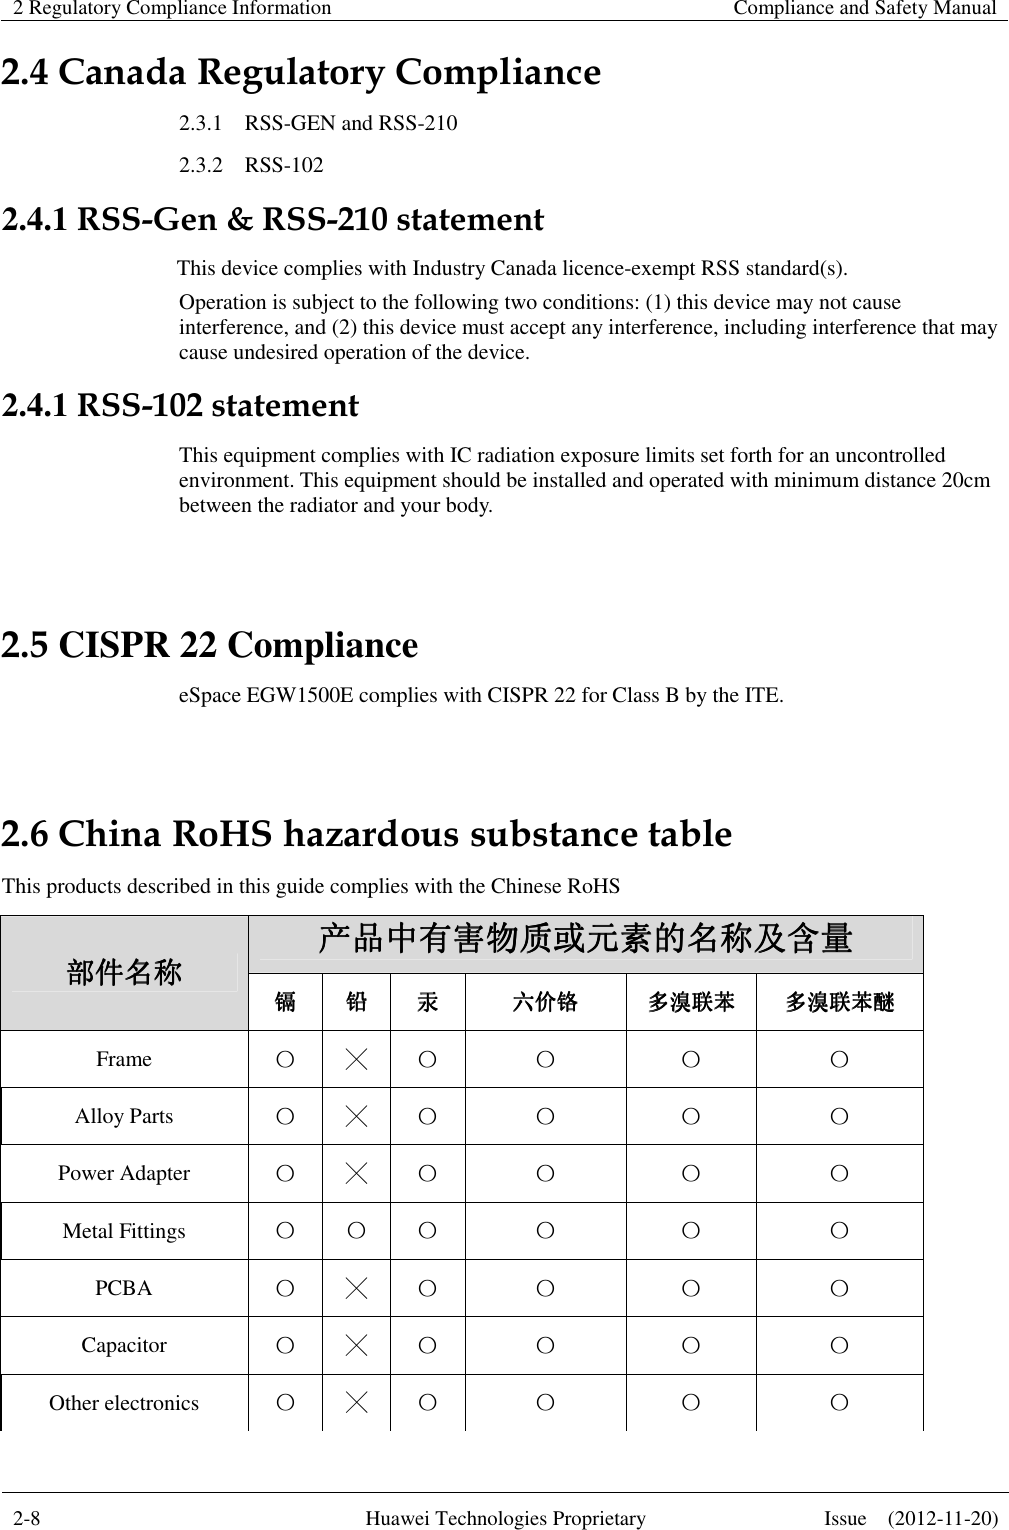 2 Regulatory Compliance Information   Compliance and Safety Manual  2-8  Huawei Technologies Proprietary  Issue    (2012-11-20)  2.4 Canada Regulatory Compliance 2.3.1    RSS-GEN and RSS-210 2.3.2    RSS-102 2.4.1 RSS-Gen &amp; RSS-210 statement This device complies with Industry Canada licence-exempt RSS standard(s).   Operation is subject to the following two conditions: (1) this device may not cause interference, and (2) this device must accept any interference, including interference that may cause undesired operation of the device.   2.4.1 RSS-102 statement This equipment complies with IC radiation exposure limits set forth for an uncontrolled environment. This equipment should be installed and operated with minimum distance 20cm between the radiator and your body.  2.5 CISPR 22 Compliance eSpace EGW1500E complies with CISPR 22 for Class B by the ITE.  2.6 China RoHS hazardous substance table This products described in this guide complies with the Chinese RoHS 产产产产品品品品中中中中有有有有害害害害物物物物质质质质或或或或元元元元素素素素的的的的名名名名称称称称及及及及含含含含量量量量 部部部部件件件件名名名名称称称称 镉镉镉镉 铅铅铅铅 汞汞汞汞 六六六六价价价价铬铬铬铬 多多多多溴溴溴溴联联联联苯苯苯苯 多多多多溴溴溴溴联联联联苯苯苯苯醚醚醚醚 Frame  〇 ╳ 〇 〇 〇 〇 Alloy Parts  〇 ╳ 〇 〇 〇 〇 Power Adapter  〇 ╳ 〇 〇 〇 〇 Metal Fittings  〇 〇 〇 〇 〇 〇 PCBA  〇 ╳ 〇 〇 〇 〇 Capacitor  〇 ╳ 〇 〇 〇 〇 Other electronics  〇 ╳ 〇 〇 〇 〇 